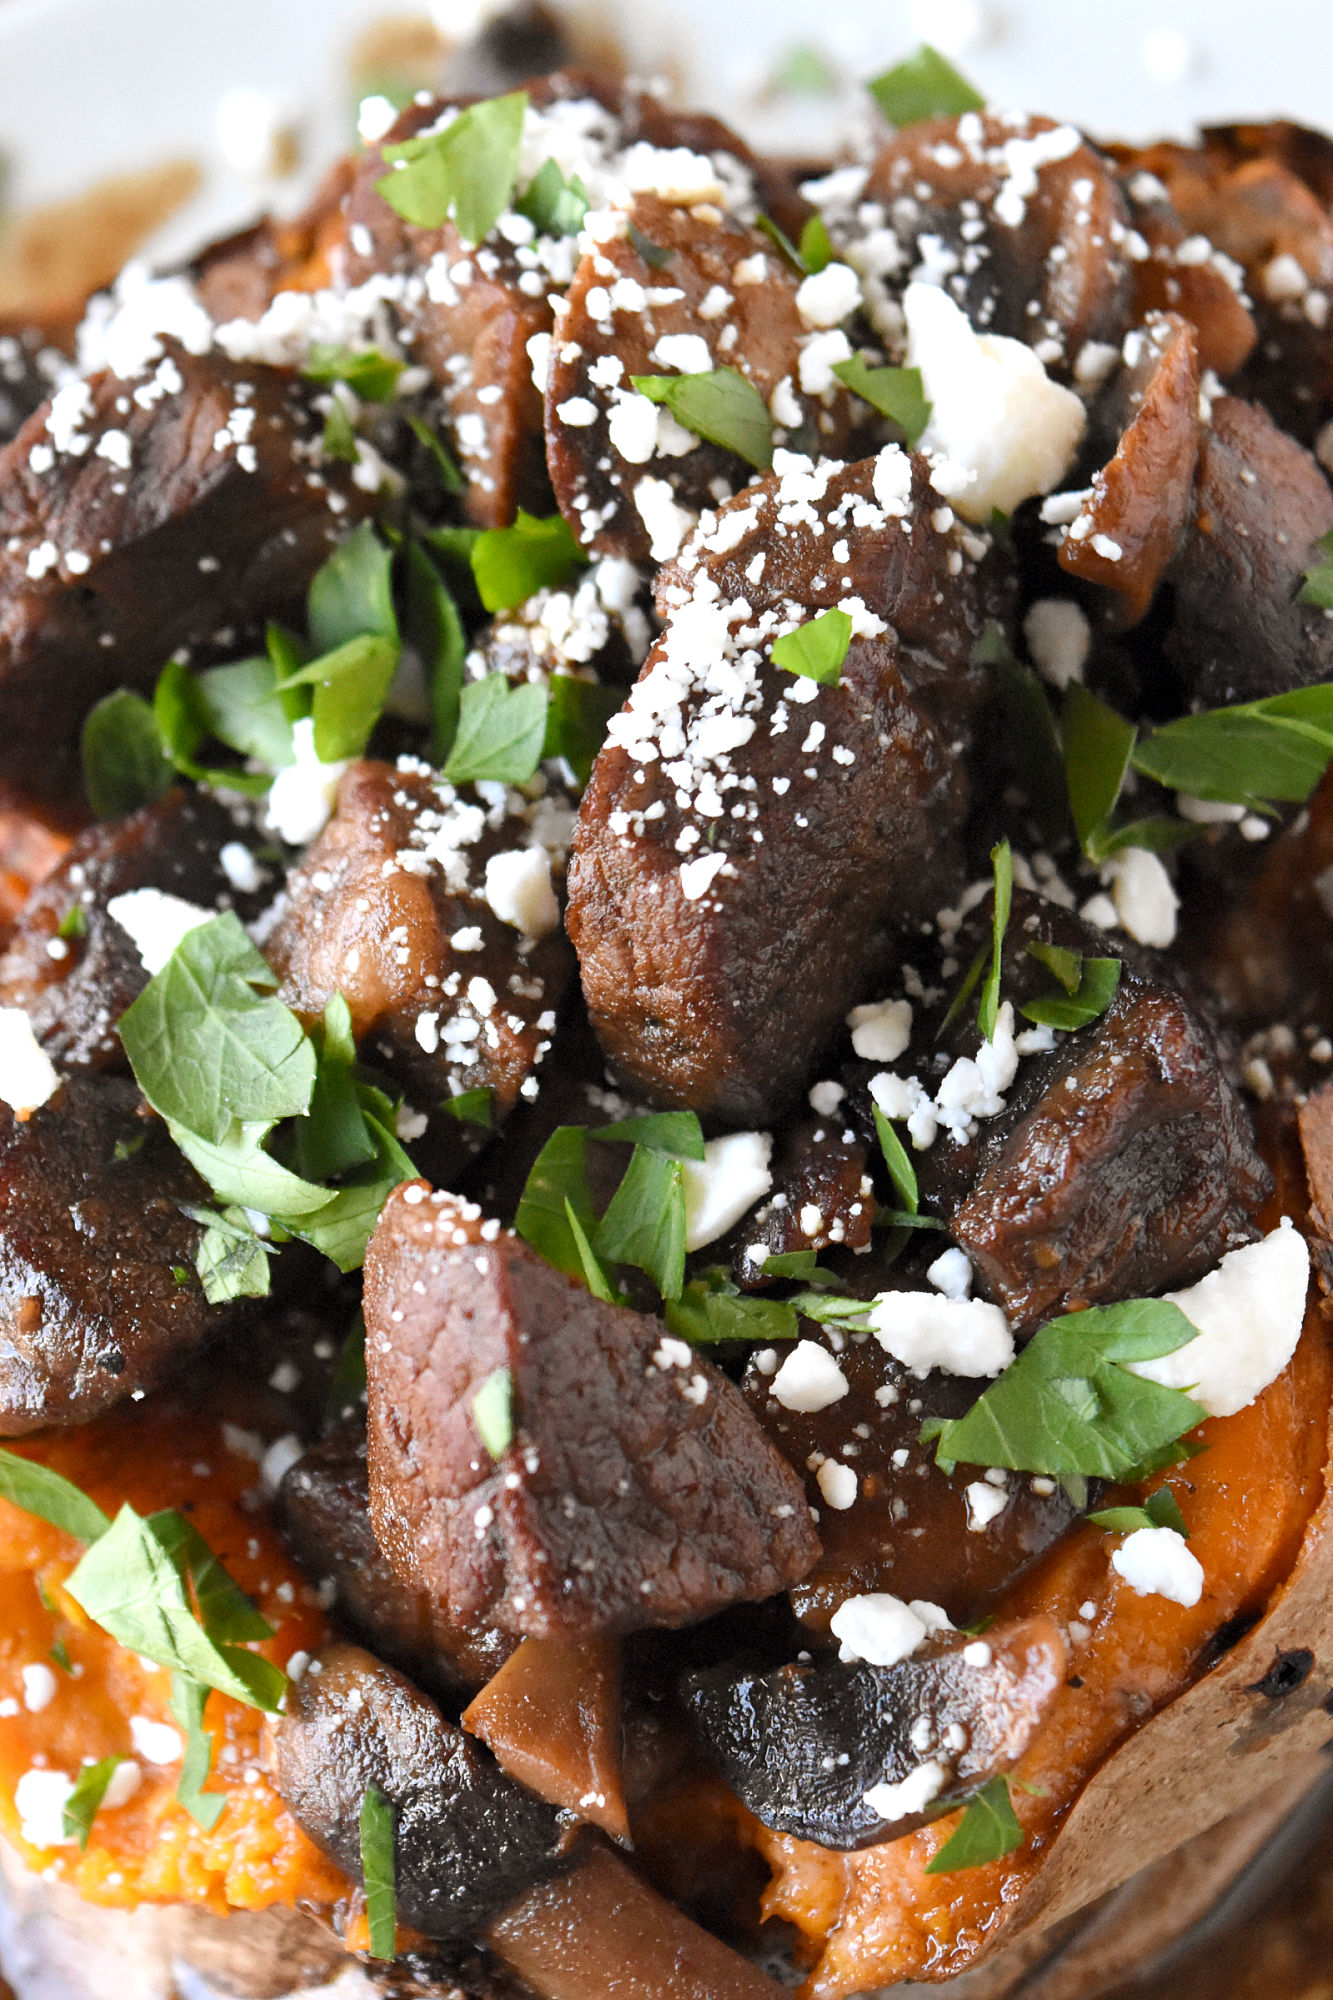 Hold onto your taste buds you go on a flavor journey with Balsamic Steak and Mushroom Bites recipe.  Whether you're cooking for a special occasion or simply craving a culinary adventure, this recipe will not disappoint. #SteakLovers #MushroomMagic #GourmetAtHome #FoodieDiaries
